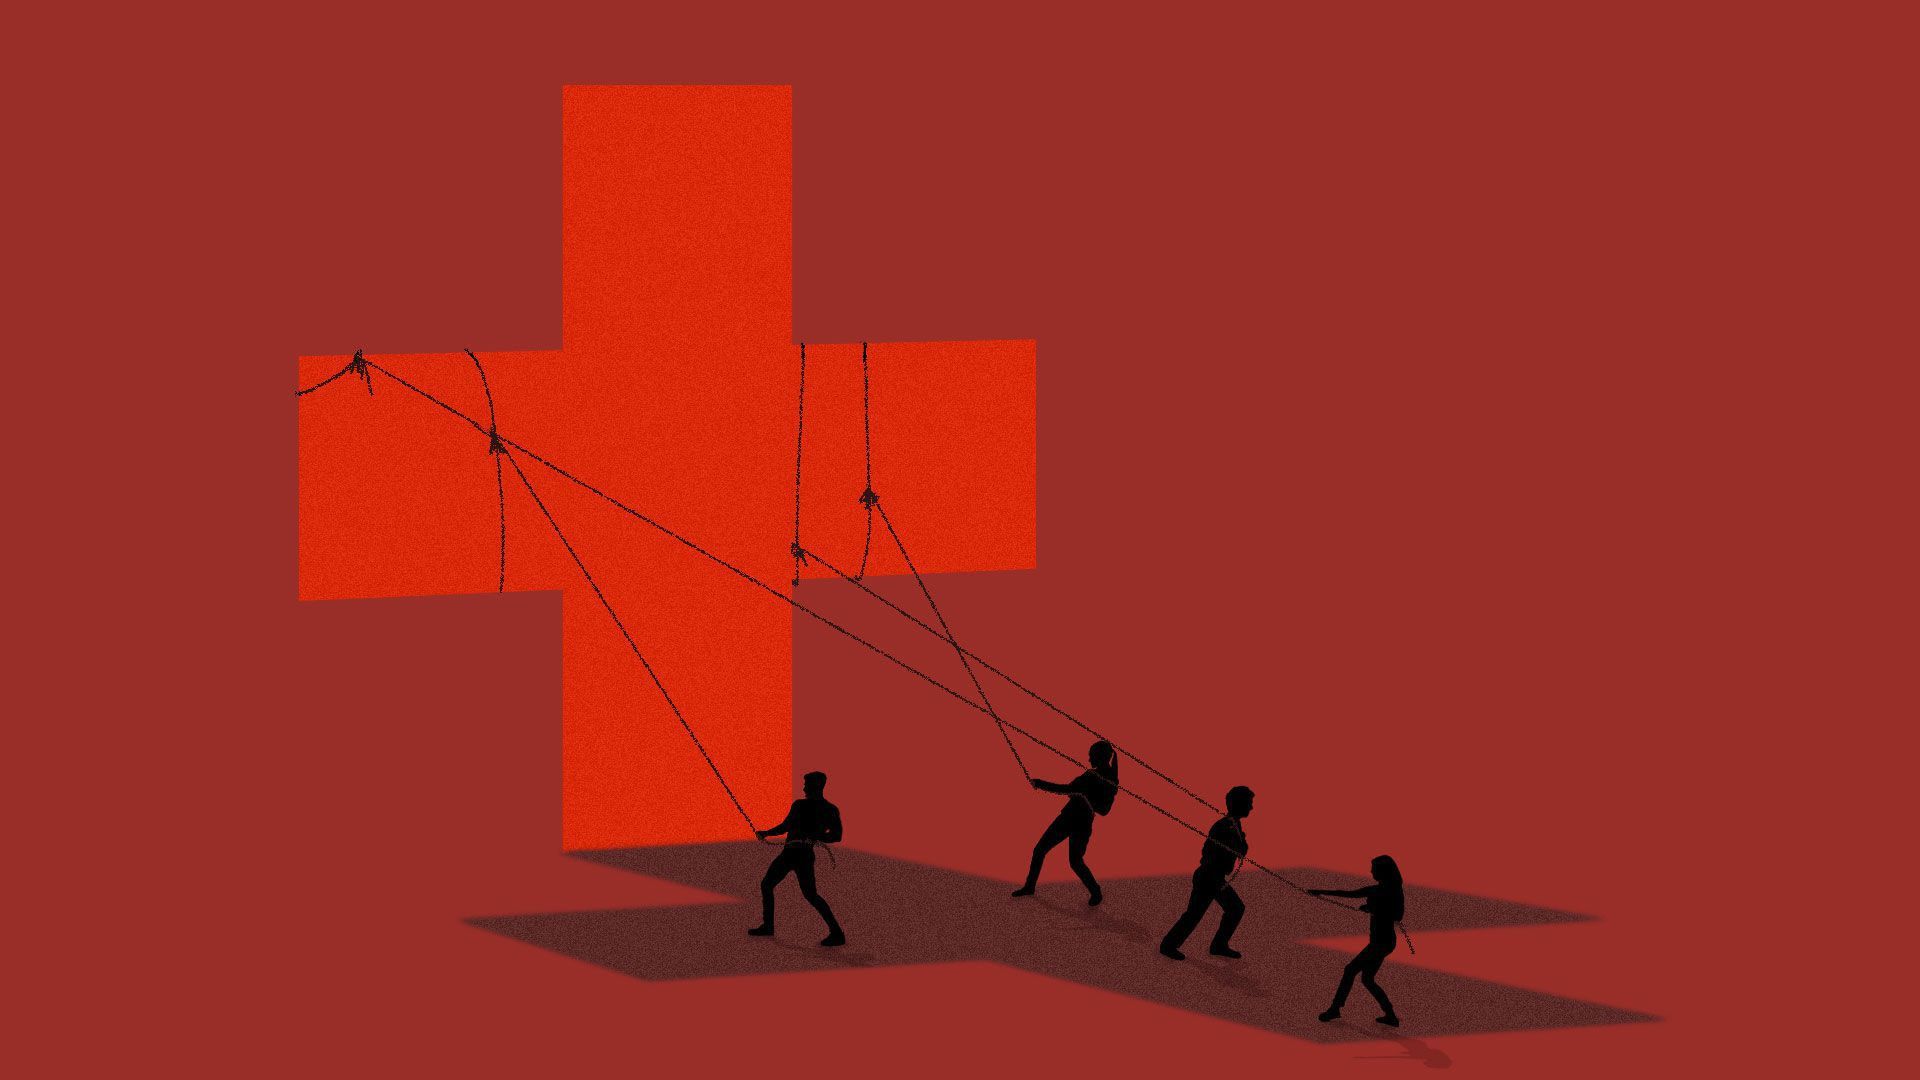 An illustration of people holding up the healthcare sign with rope.